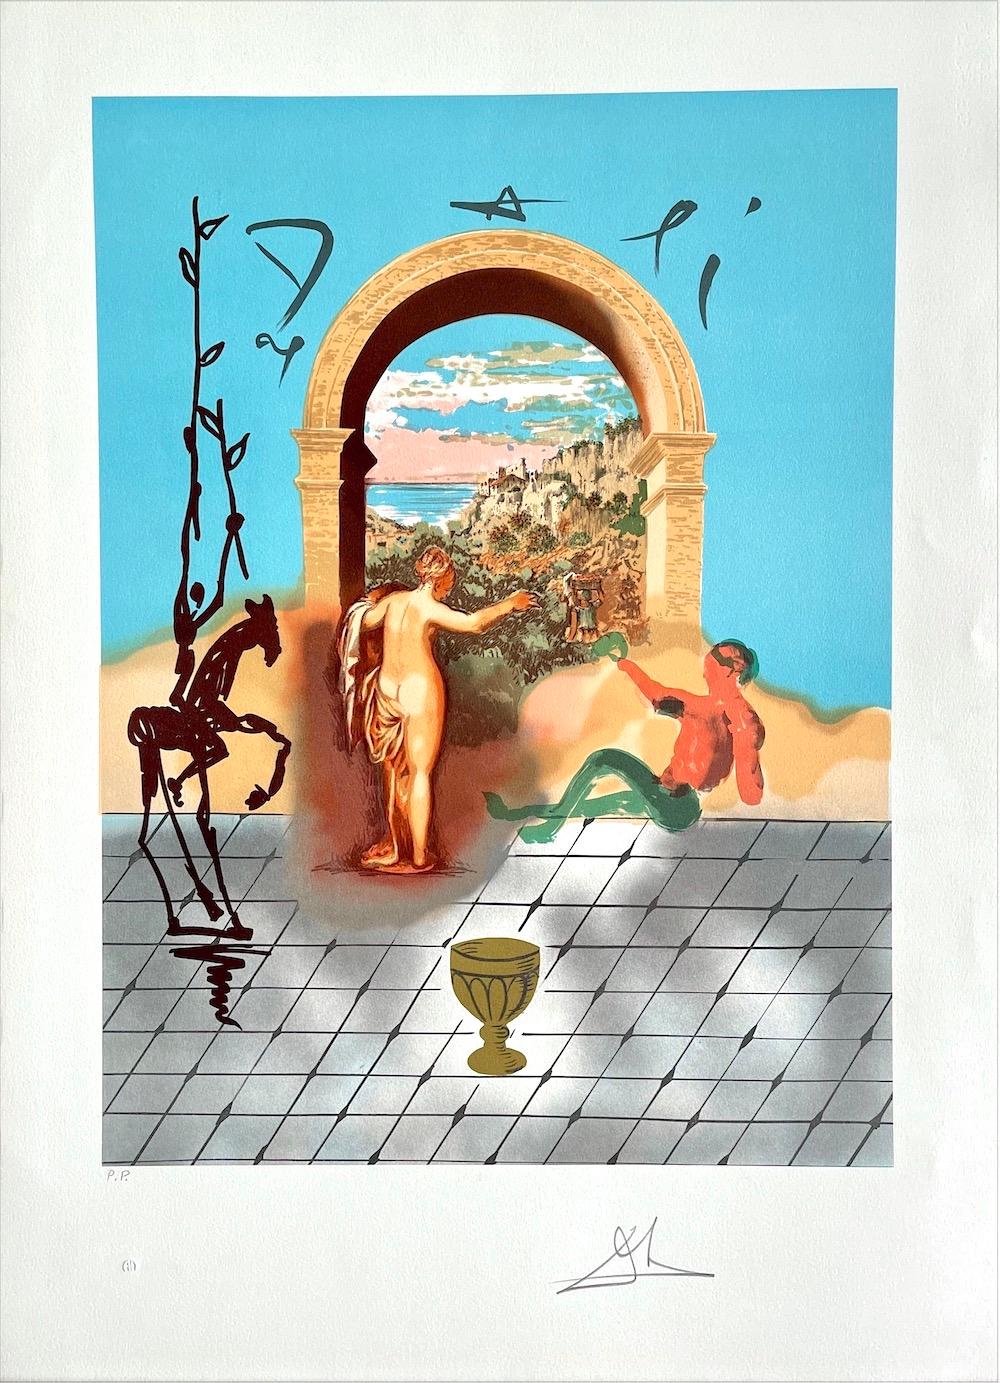 GATEWAY TO THE NEW WORLD, Dali Discovers America Portfolio, Signed Lithograph - Print by Salvador Dalí